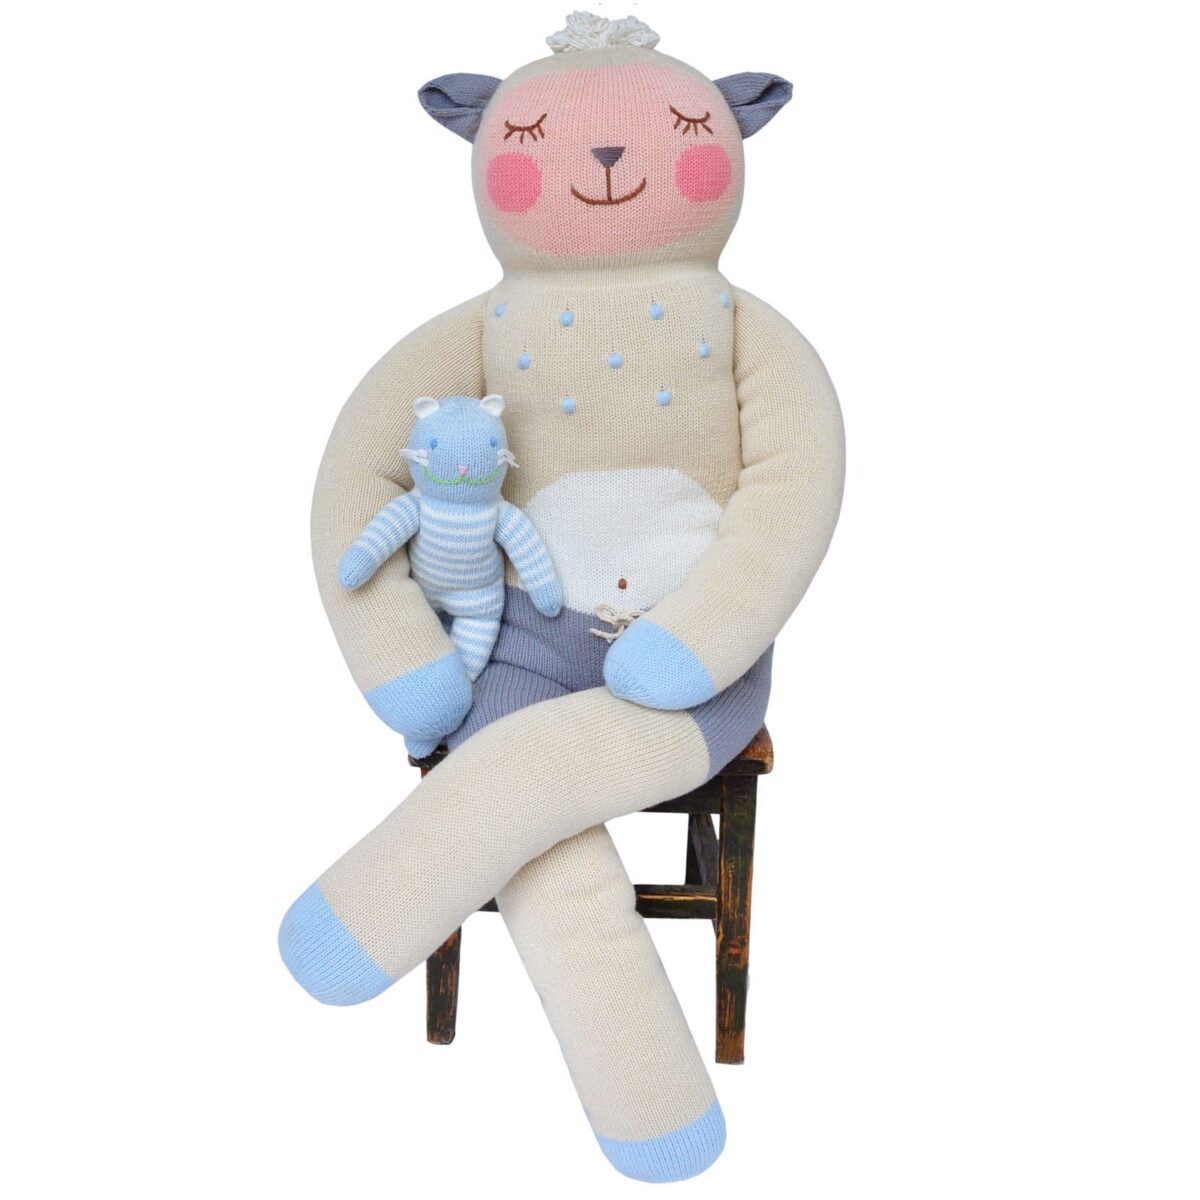 doll_giant_wooly_1024x1024@2x